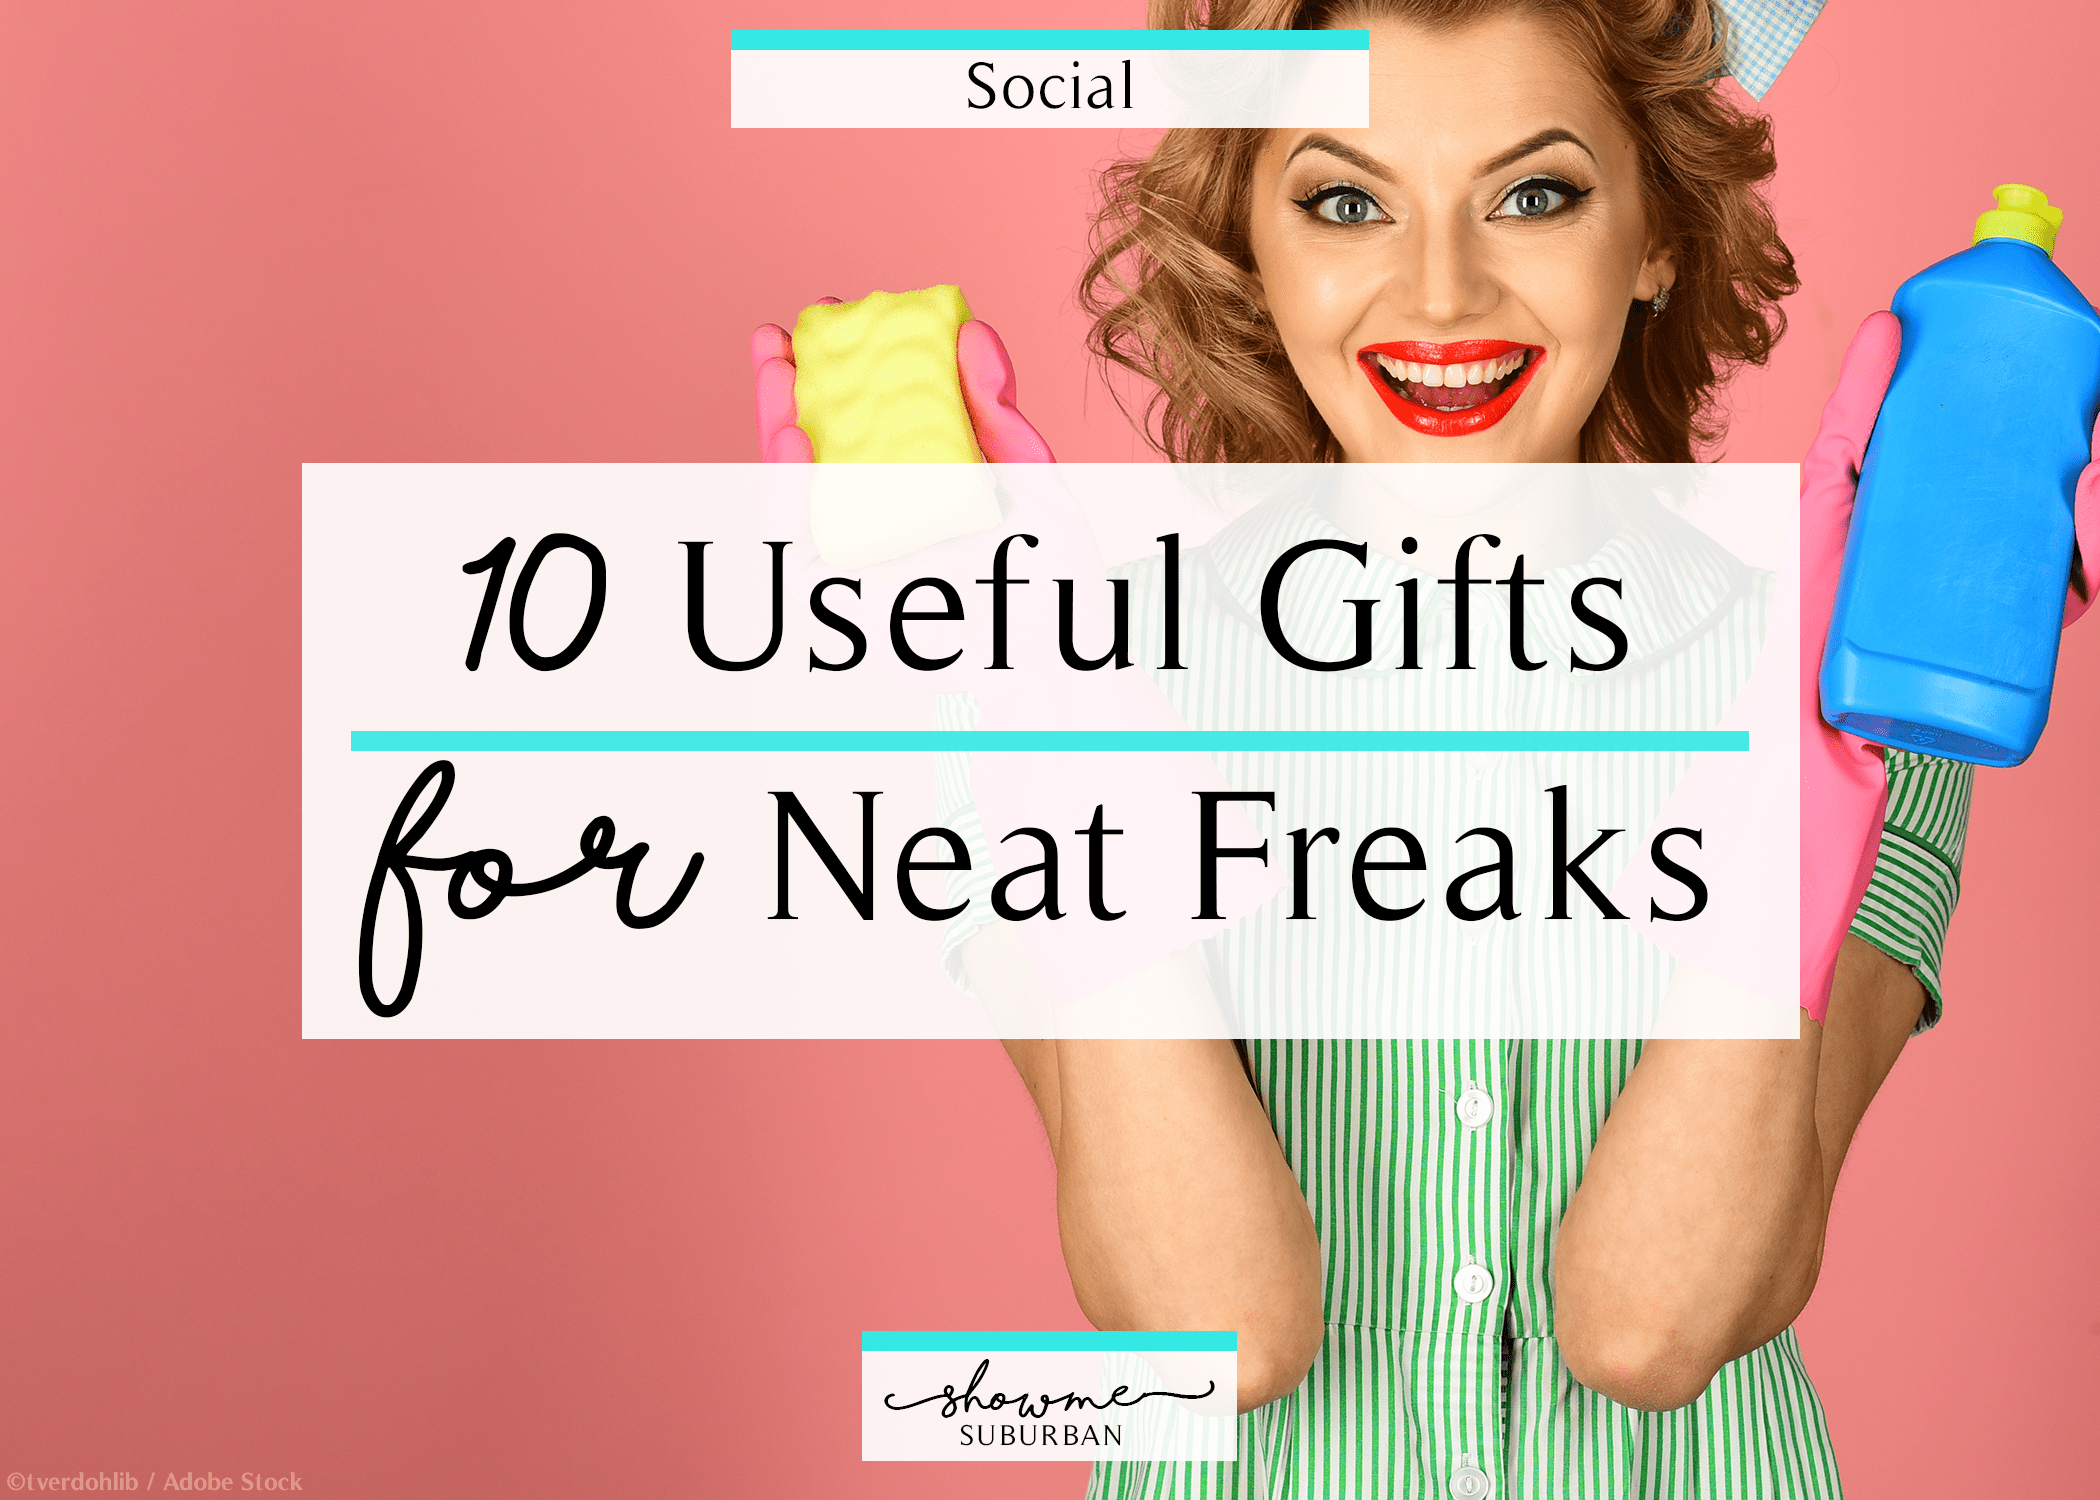 53 Super Useful Gift Ideas Every Neat Freak Needs To Have - The